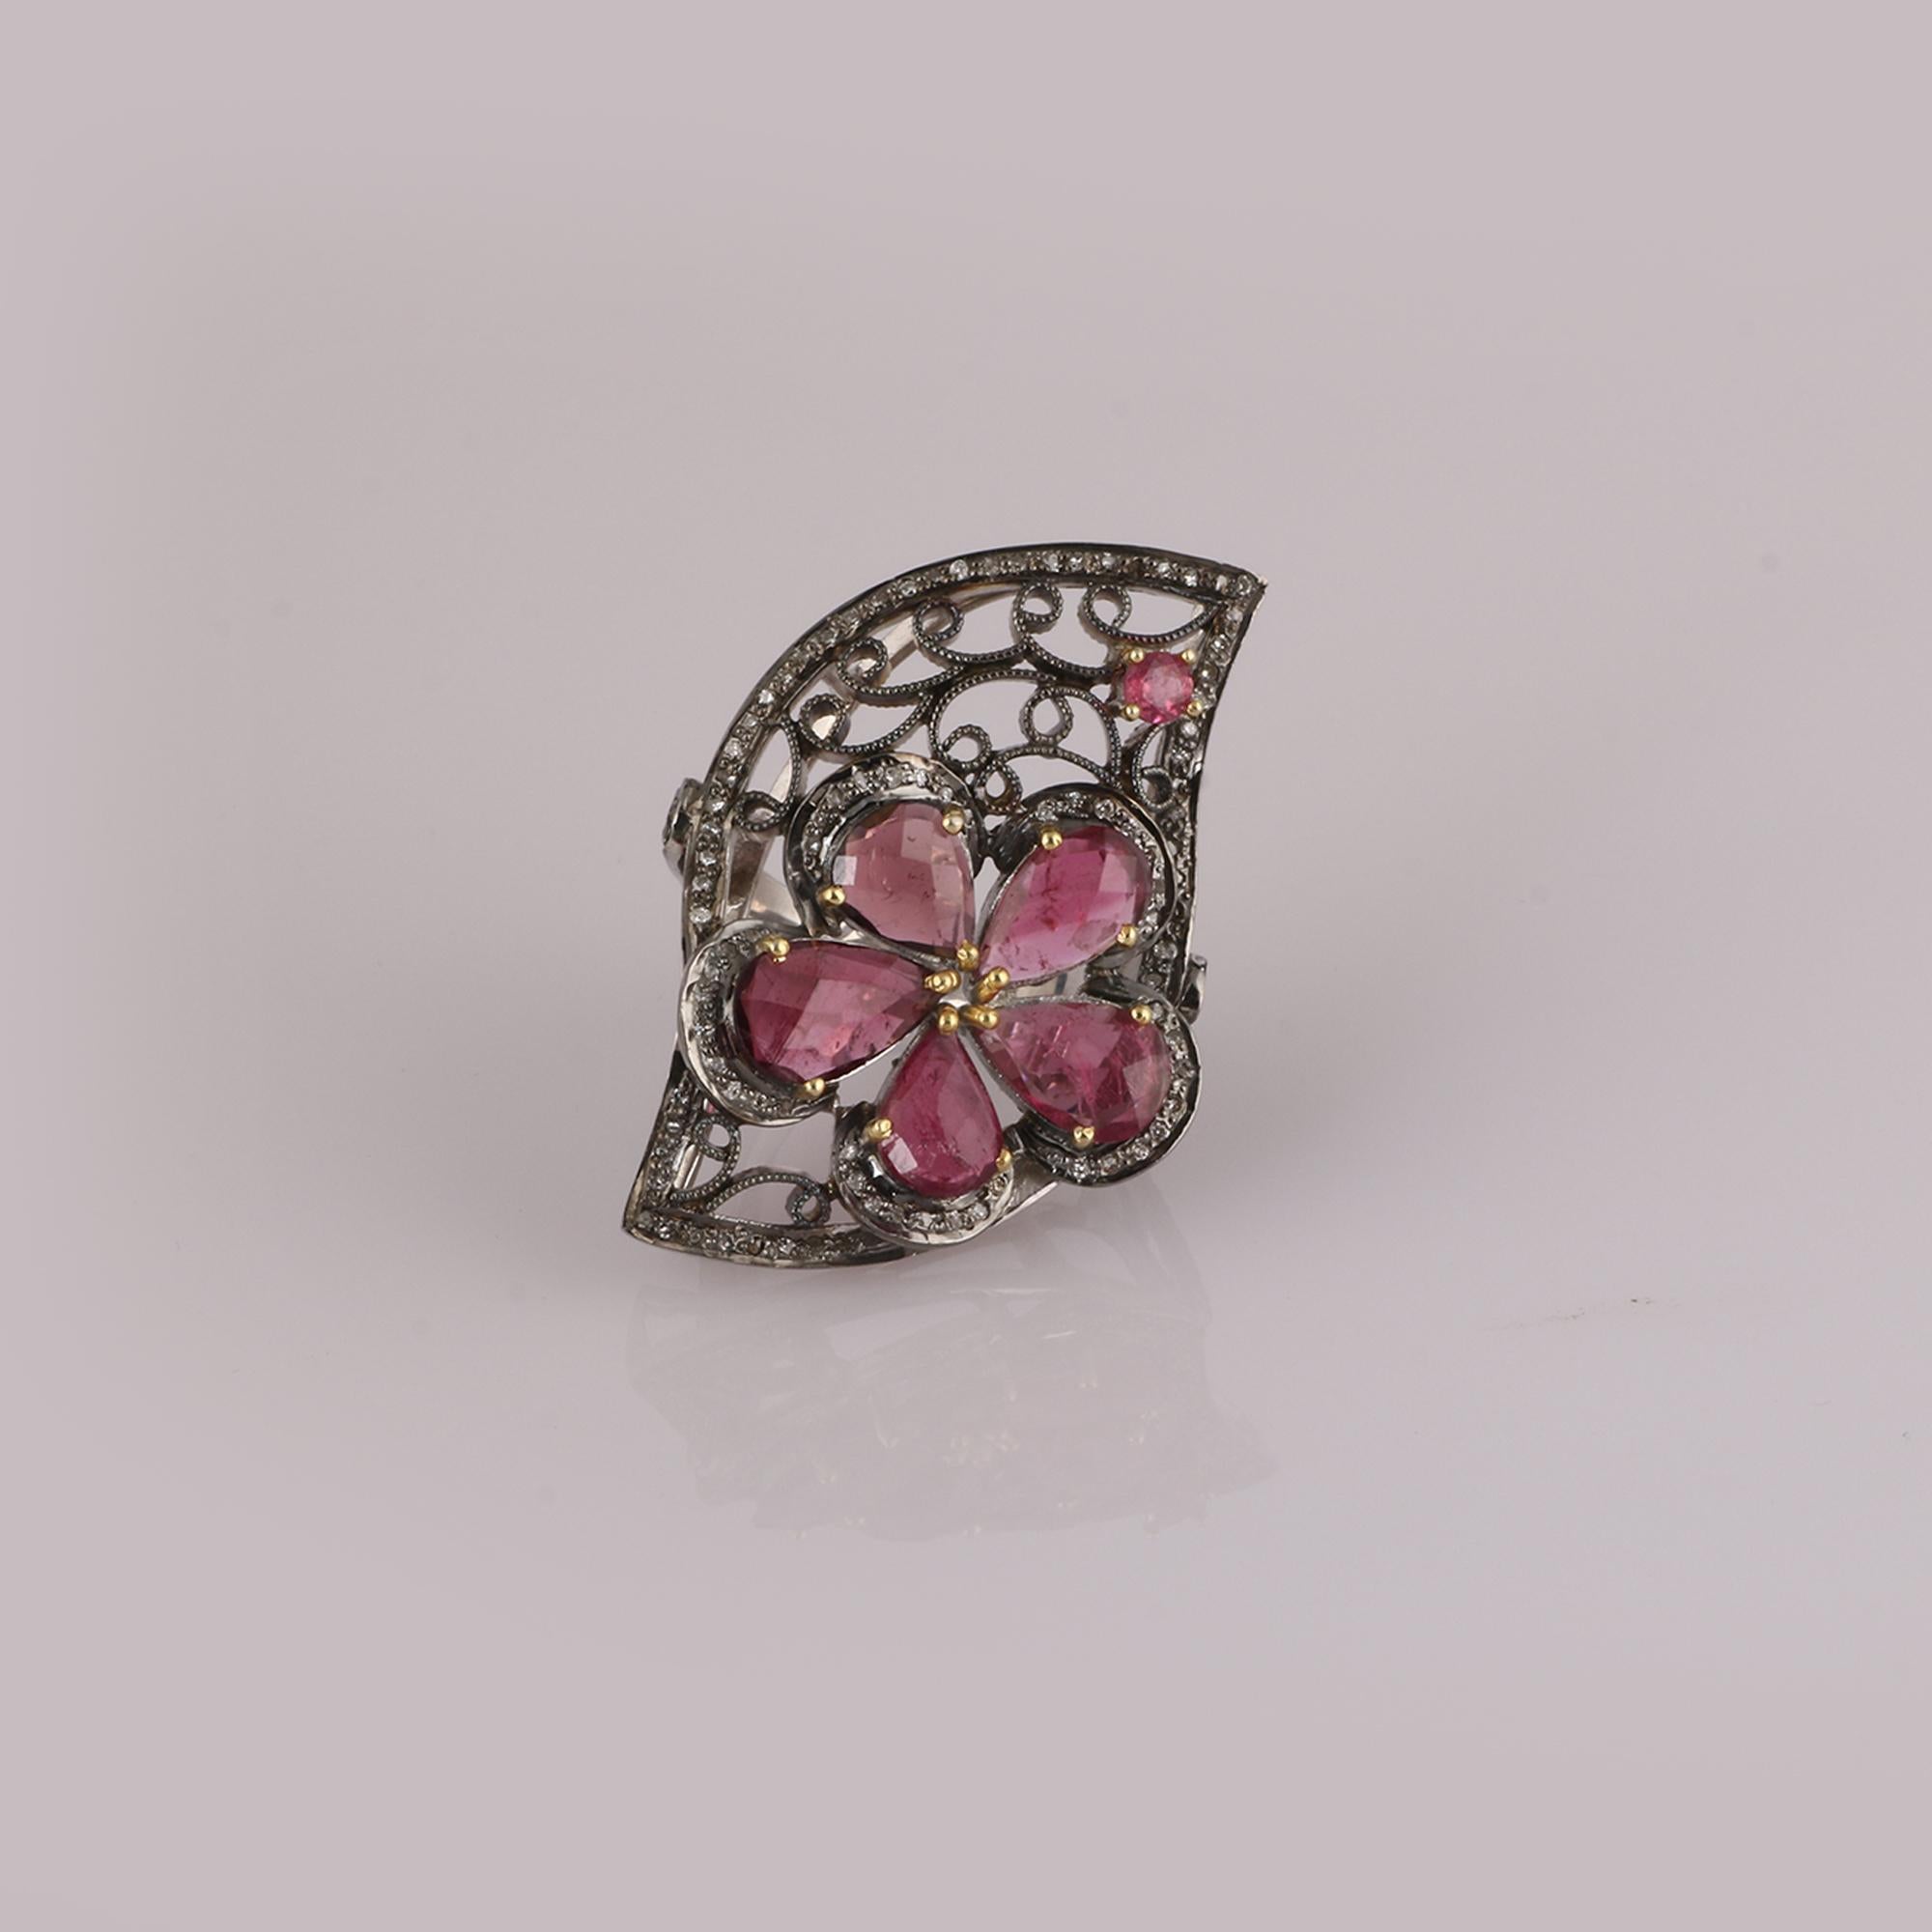 Item details:-

✦ SKU:- ESRG00233

✦ Material :- 925 Sterling Silver
✦ Gemstone Specification:-
✧ Diamond
✧ Pink Tourmaline

✦ Approx. Diamond Weight : 0.45
✦ Approx. Silver Weight : 10.49
✦ Approx. Gross Weight : 11.4

Ring Size (US): 6

You will